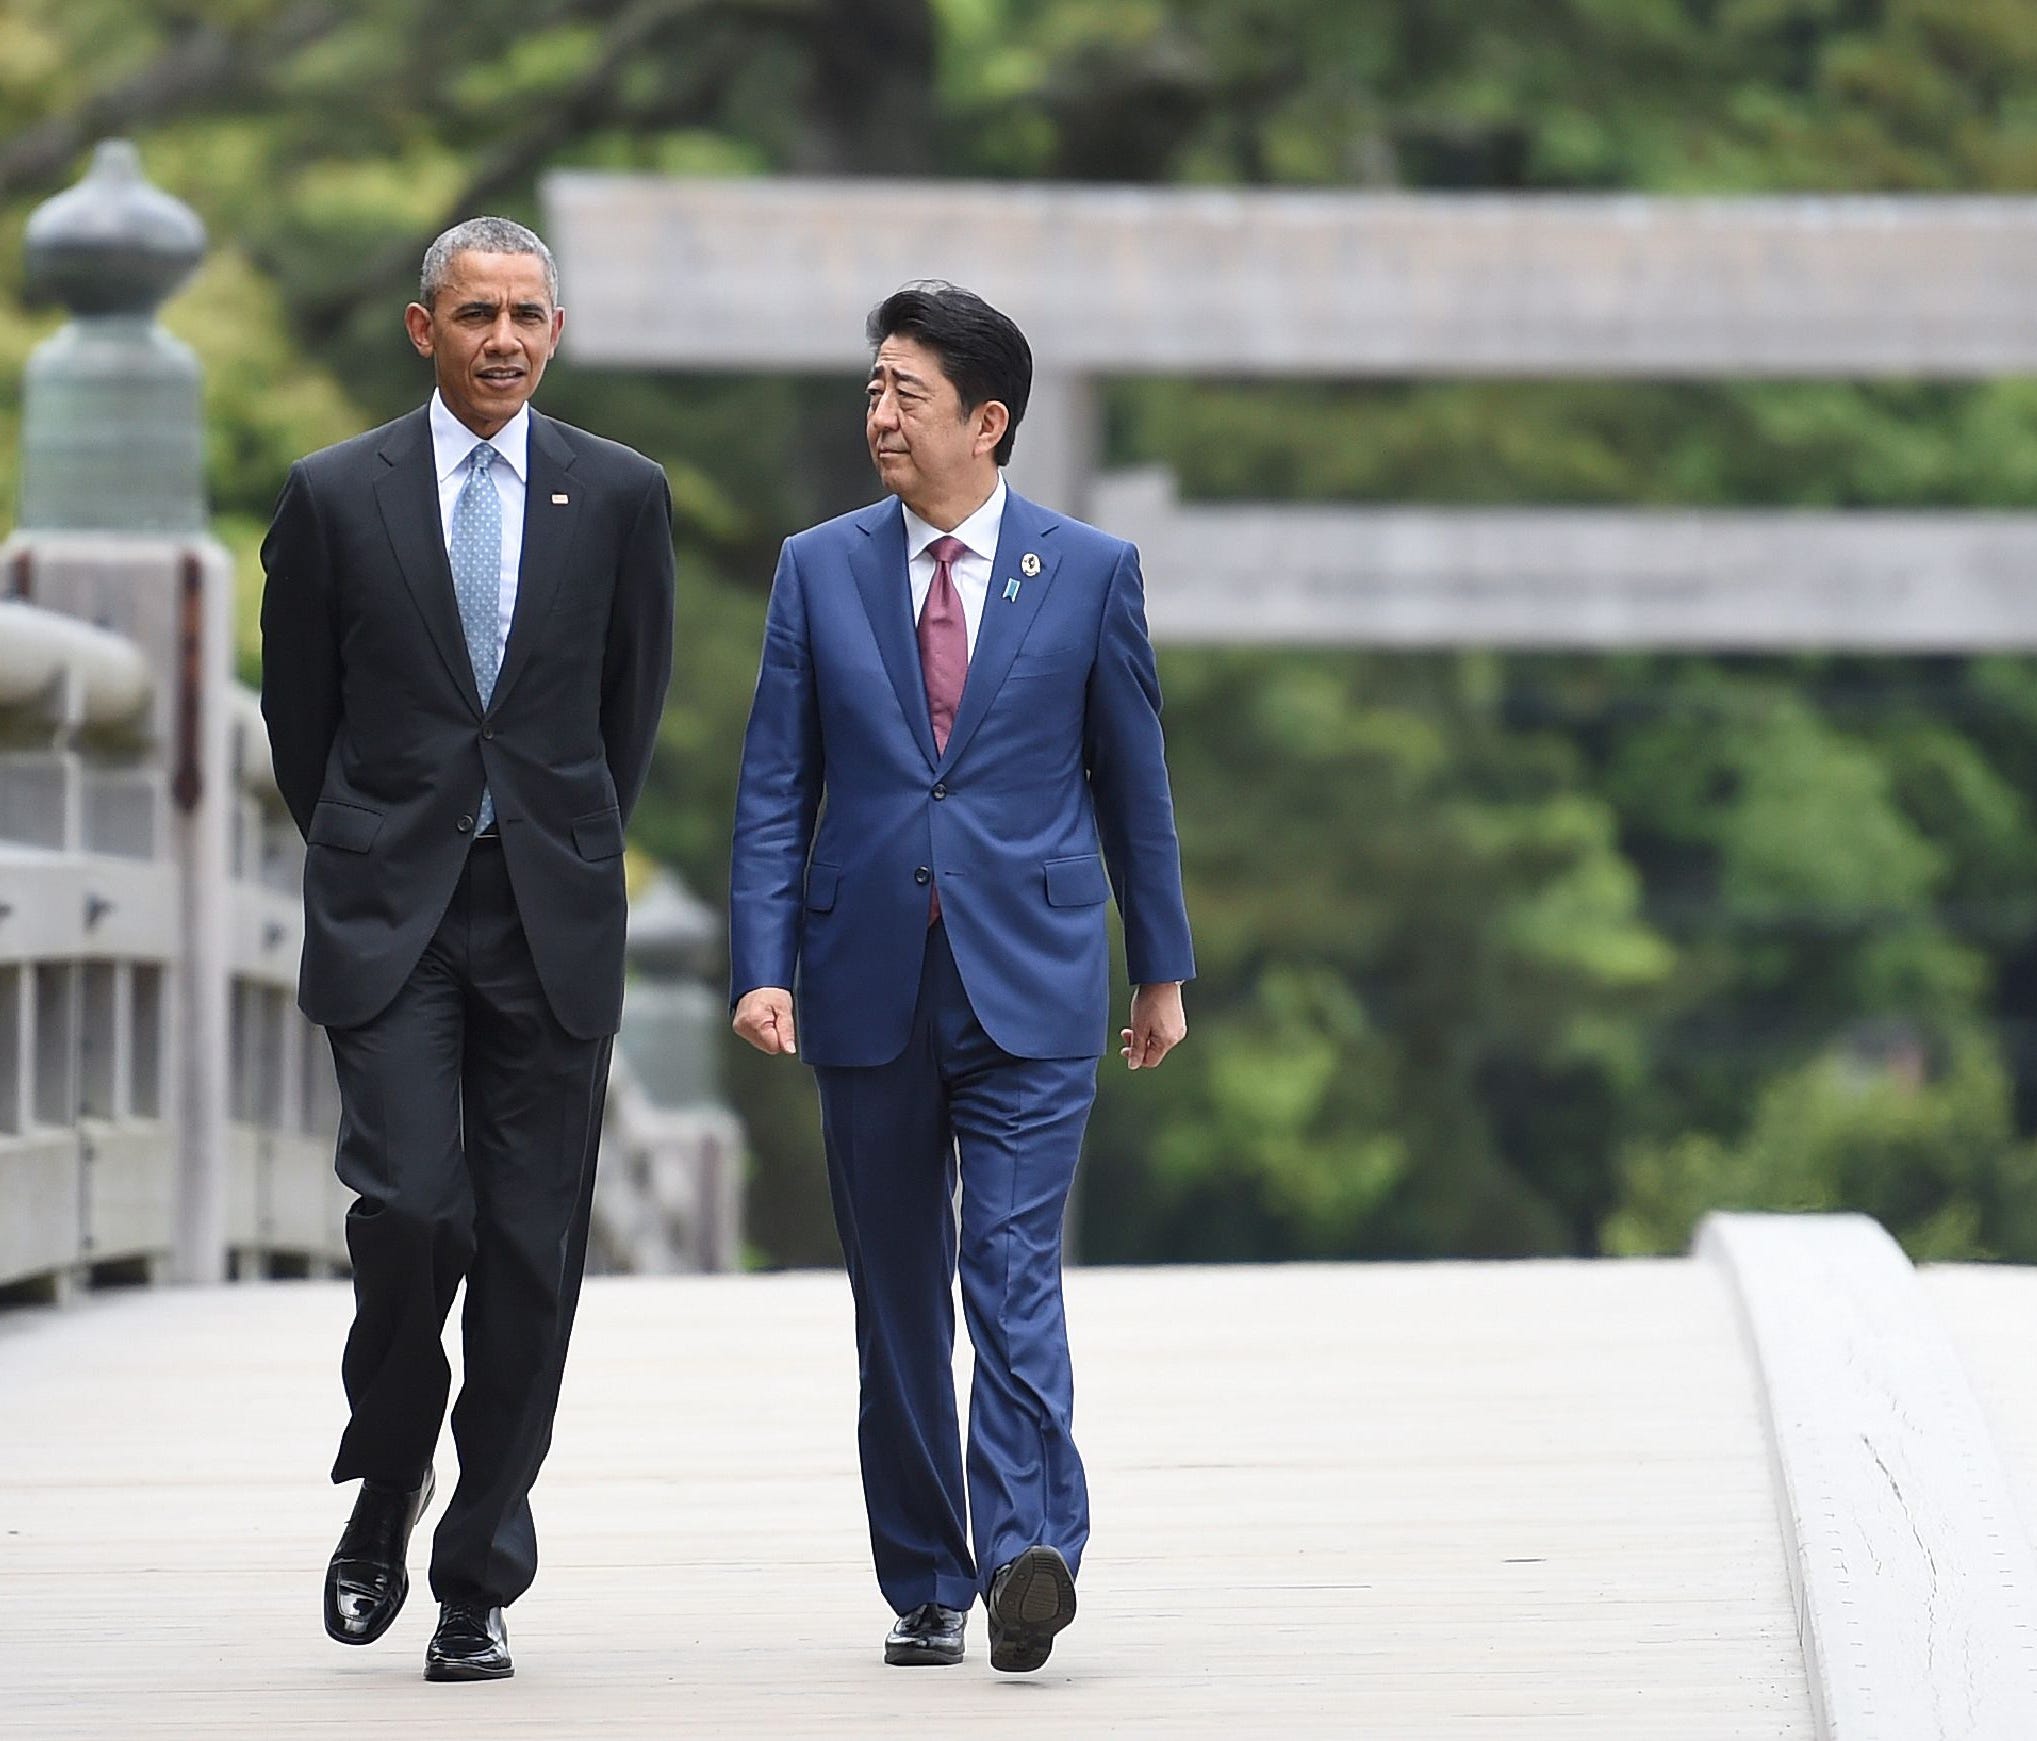 President Obama and Japanese Prime Minister Shinzo Abe, shown at a May conference in Japan, will meet again at Pearl Harbor on Tuesday.